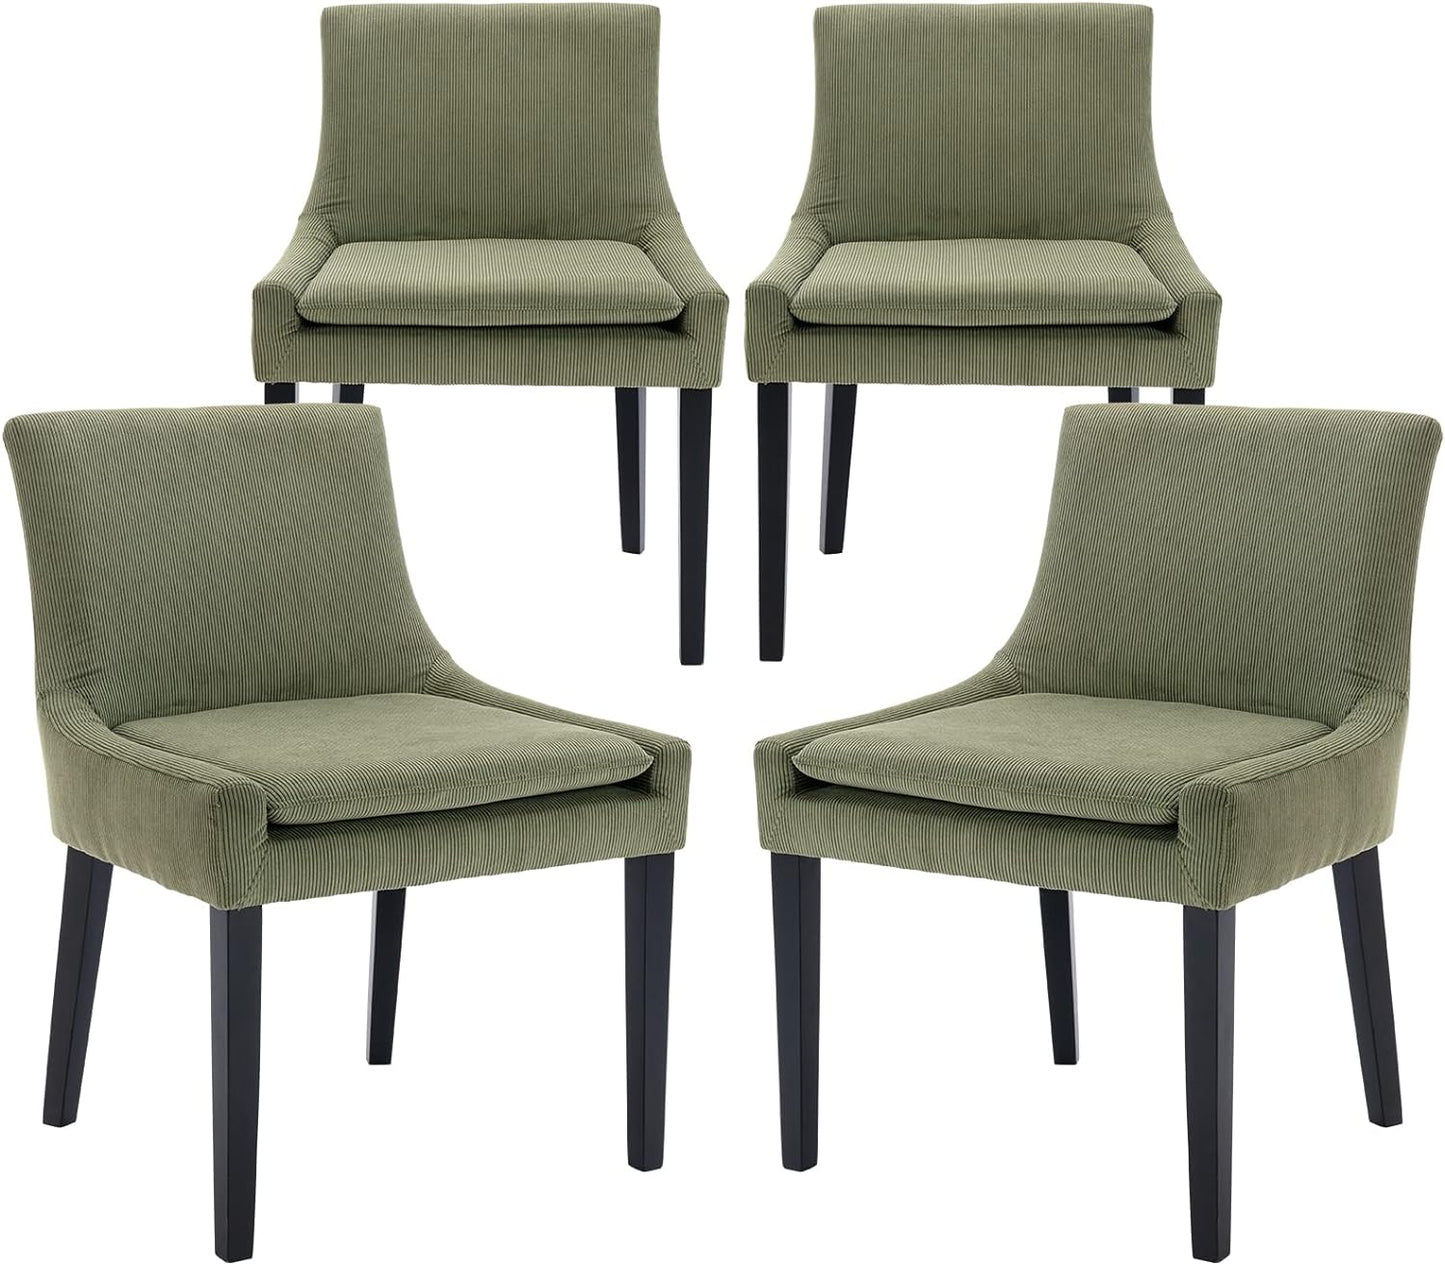 Corduroy Dining Chairs Set of 2 Upholstered Accent Side Leisure Chairs with Mid Back and Wood Legs for Living Room/Dining Room/Bedroom/Guest Room-Light Green